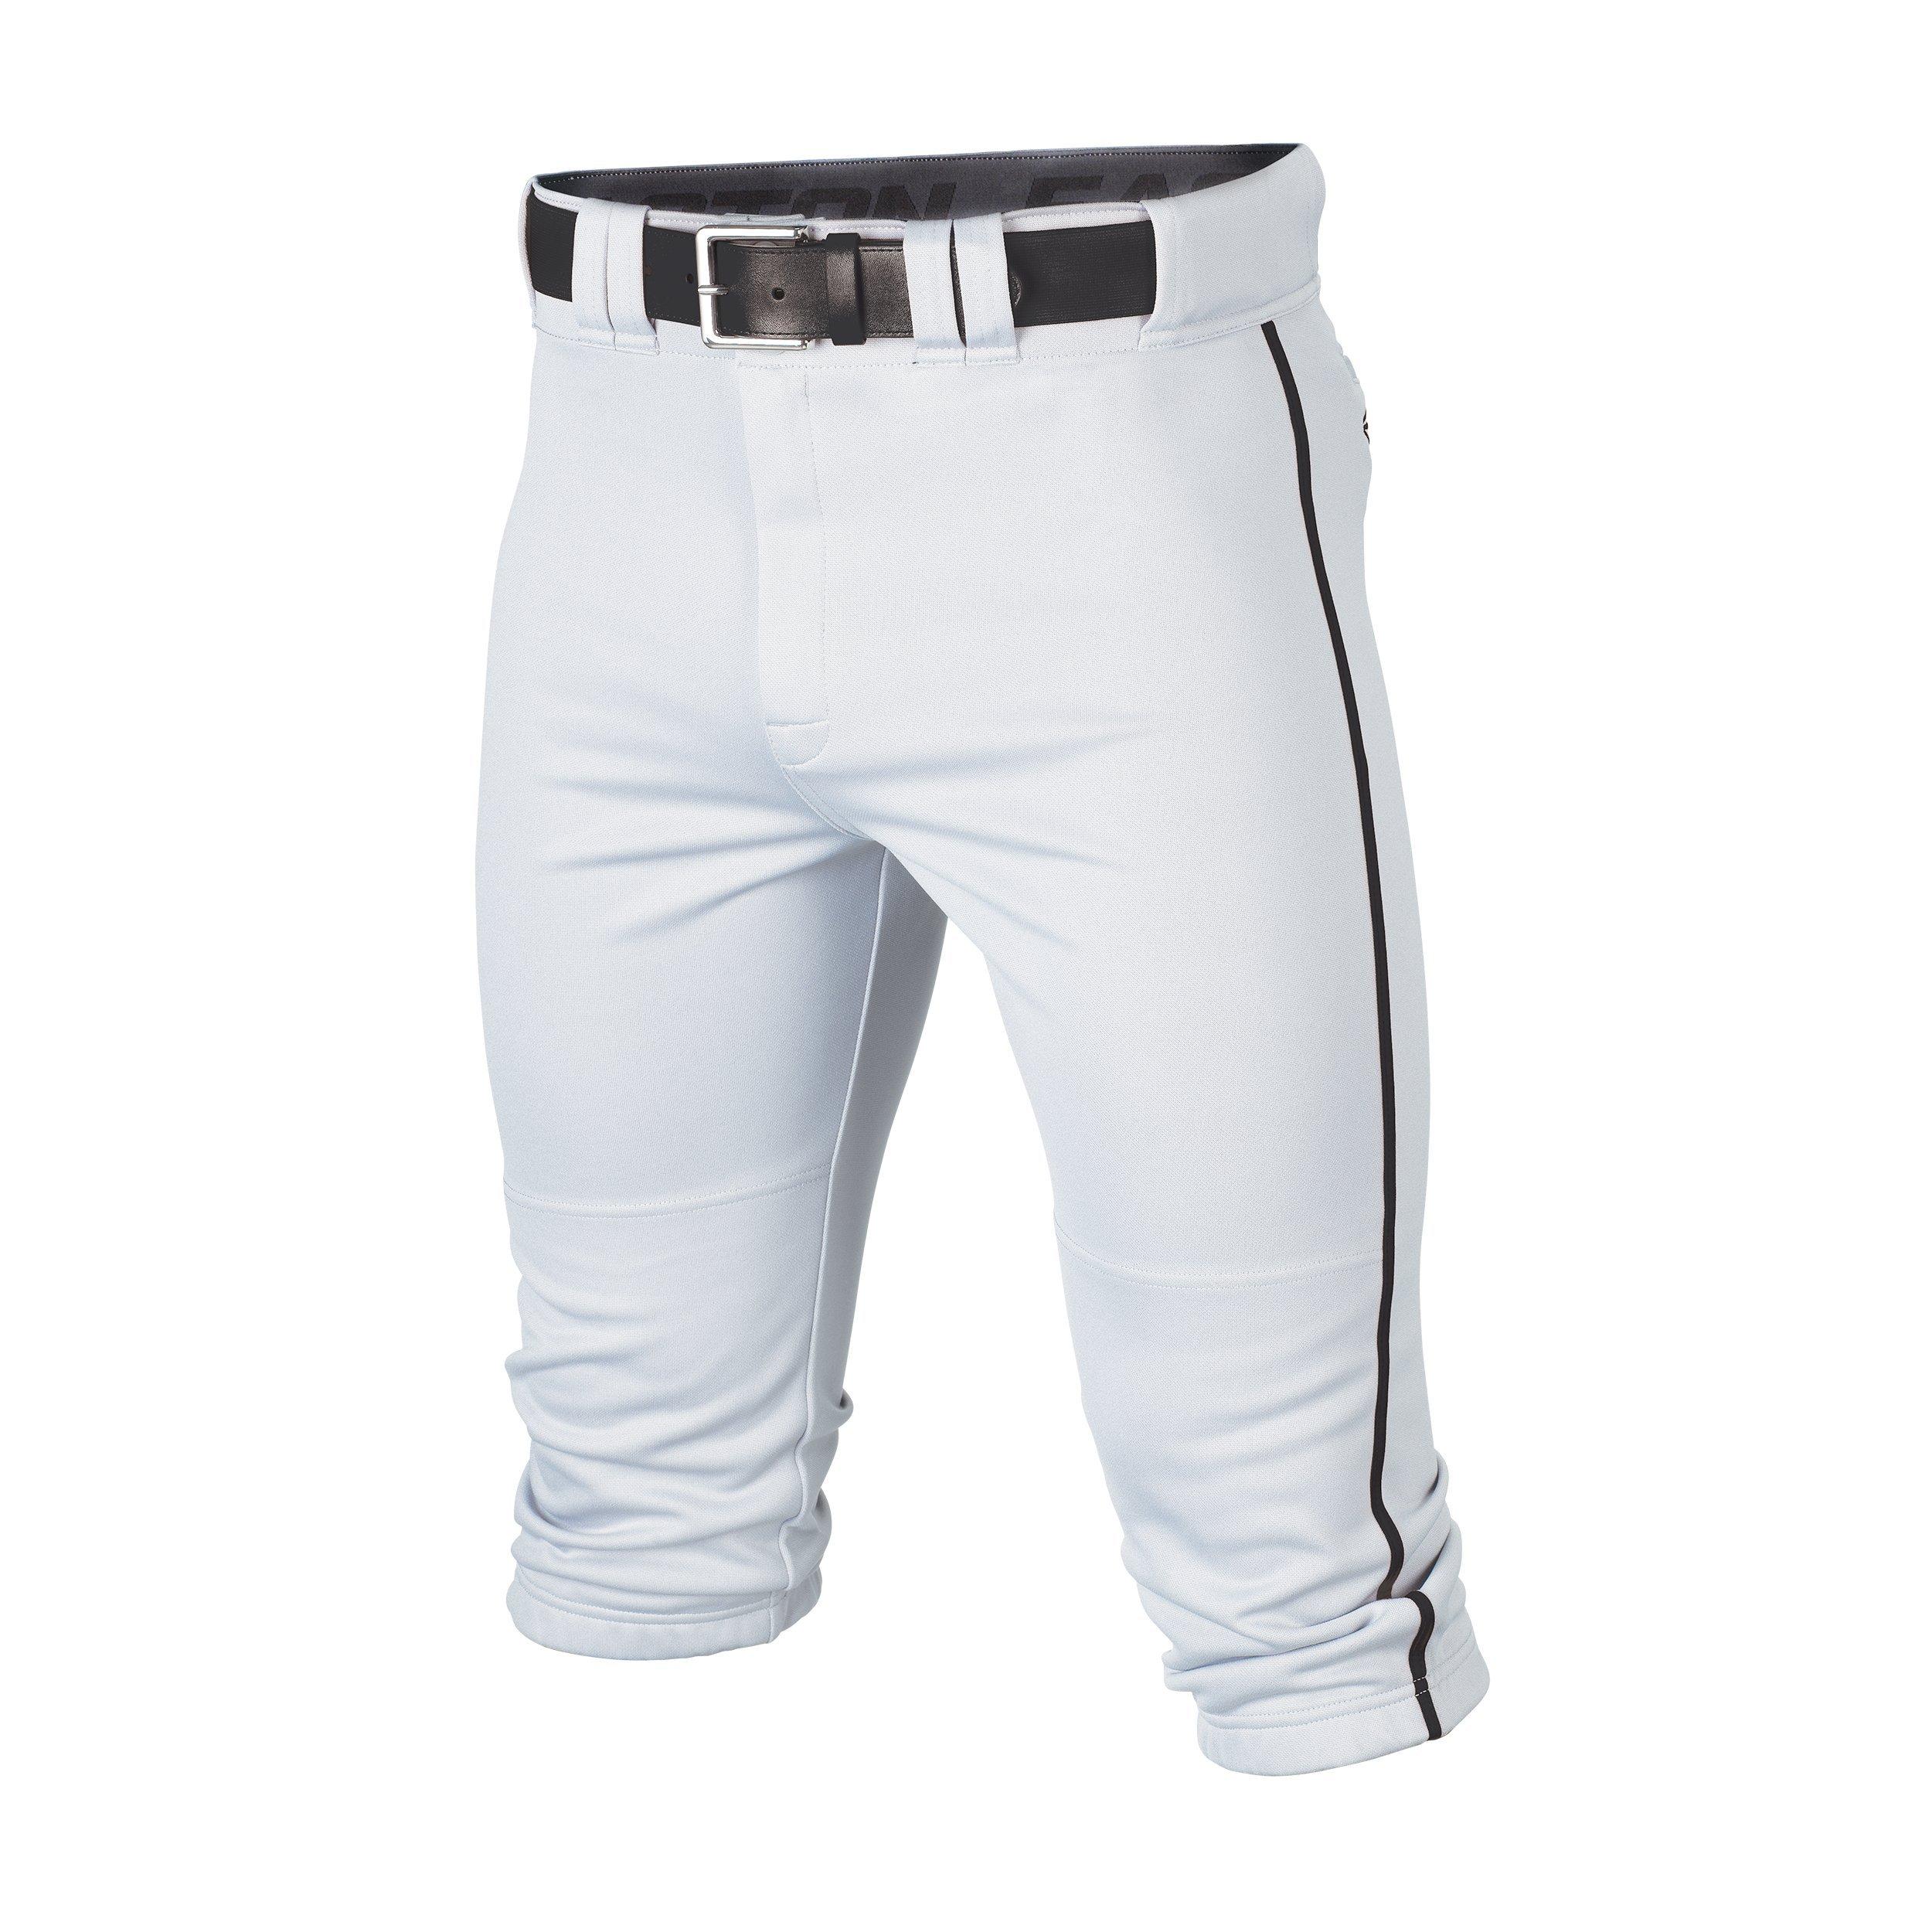 Alleson Athletic Youth Baseball Pant GRAY with Braid Piping 605WLBY Open Bottom 